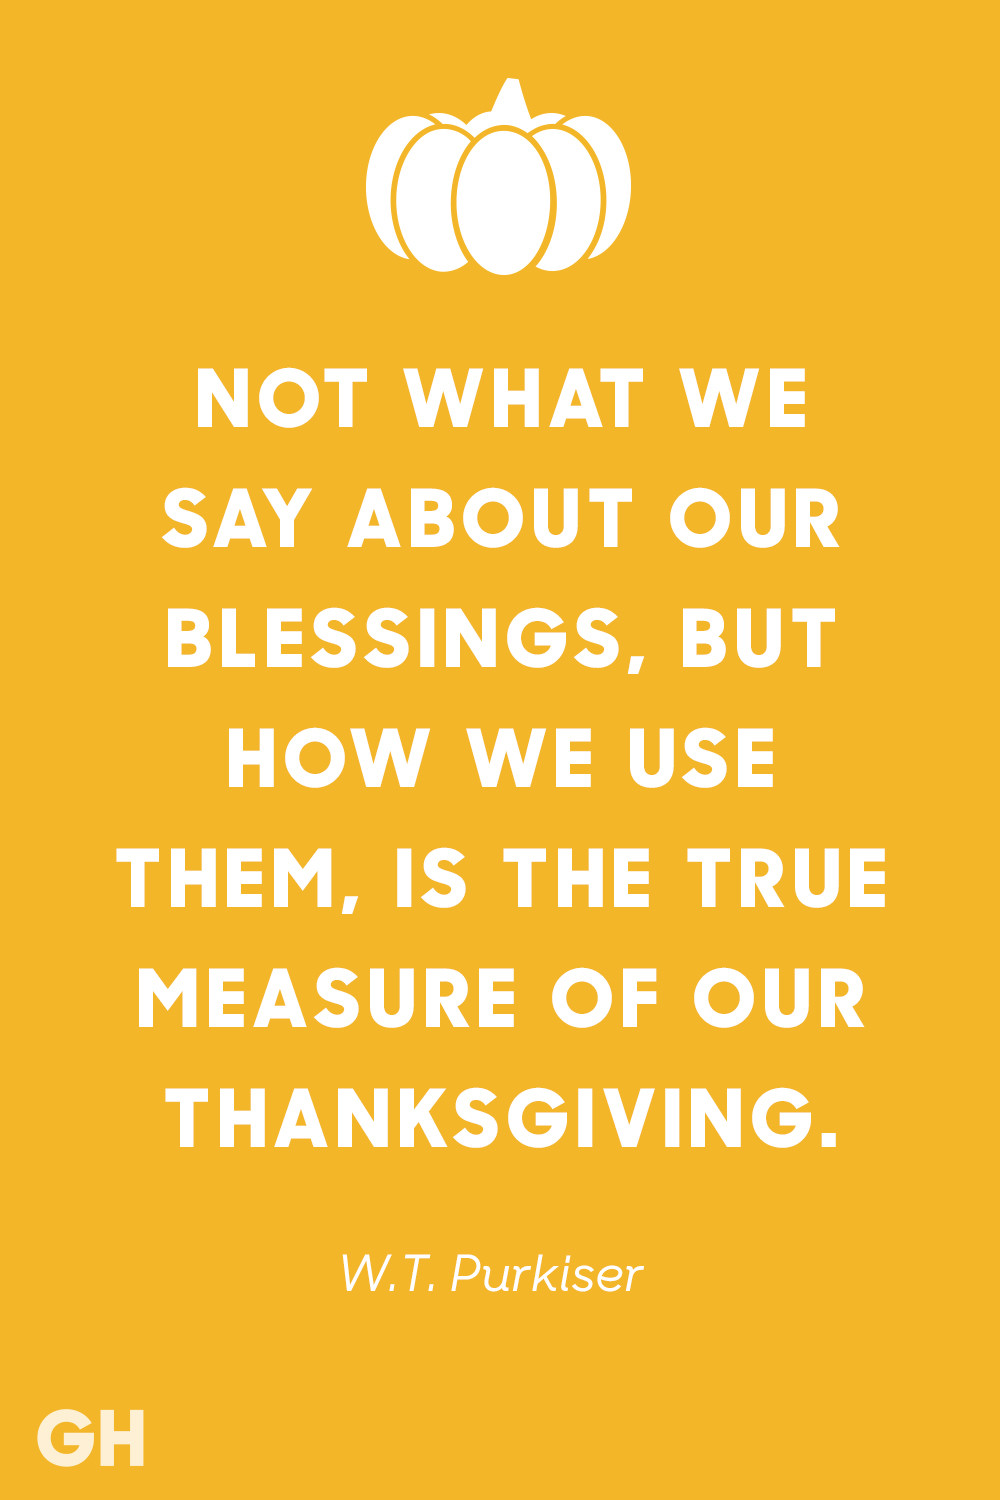 Thanksgiving Quotes
 15 Best Thanksgiving Quotes Inspirational and Funny